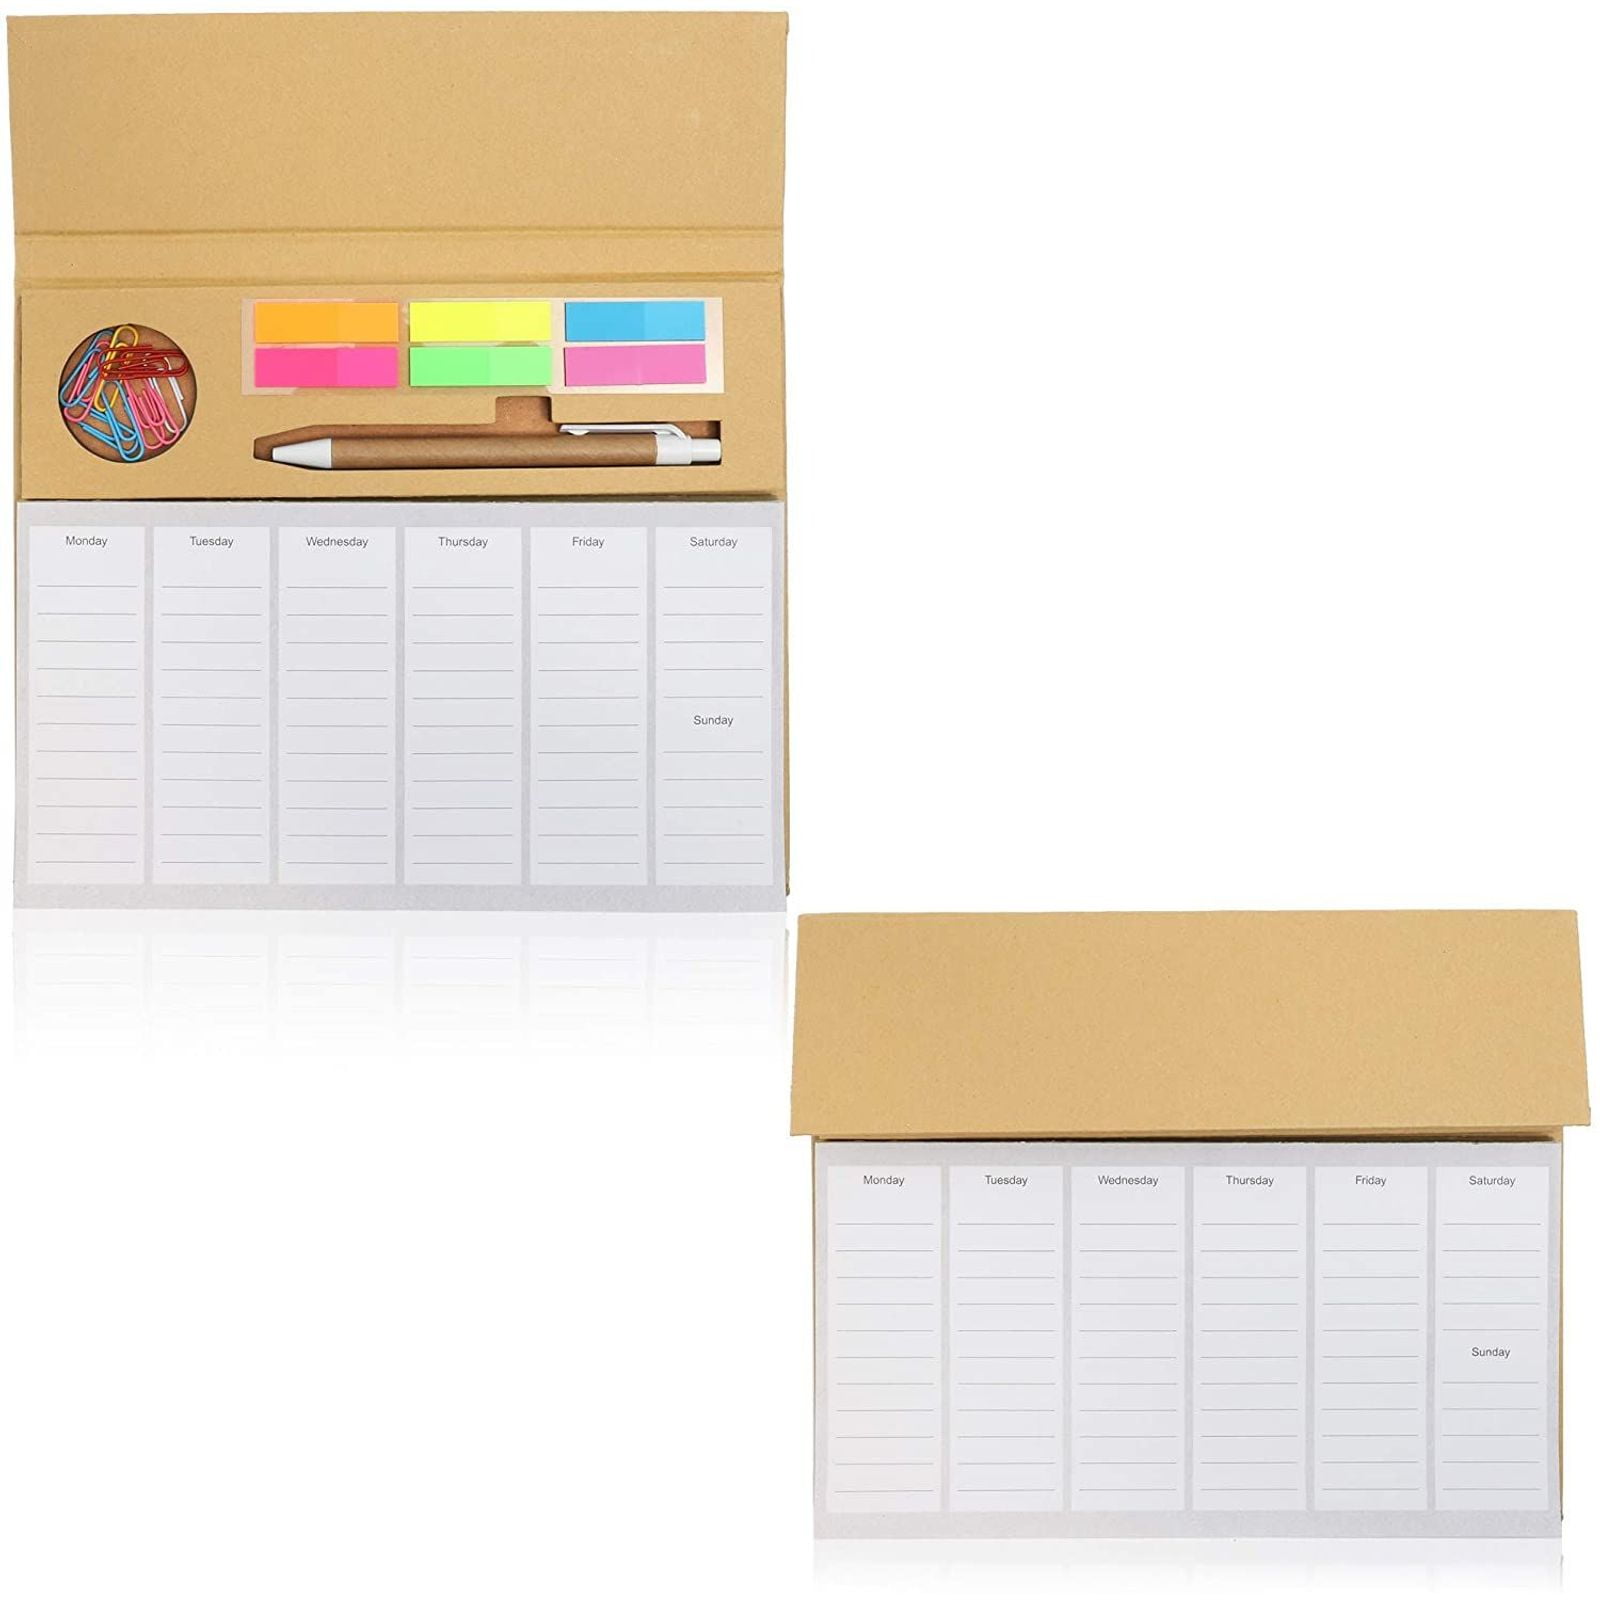 2 Pack Desktop Weekly Planner Pad Calendar with To-Do List and Sticky Notes 